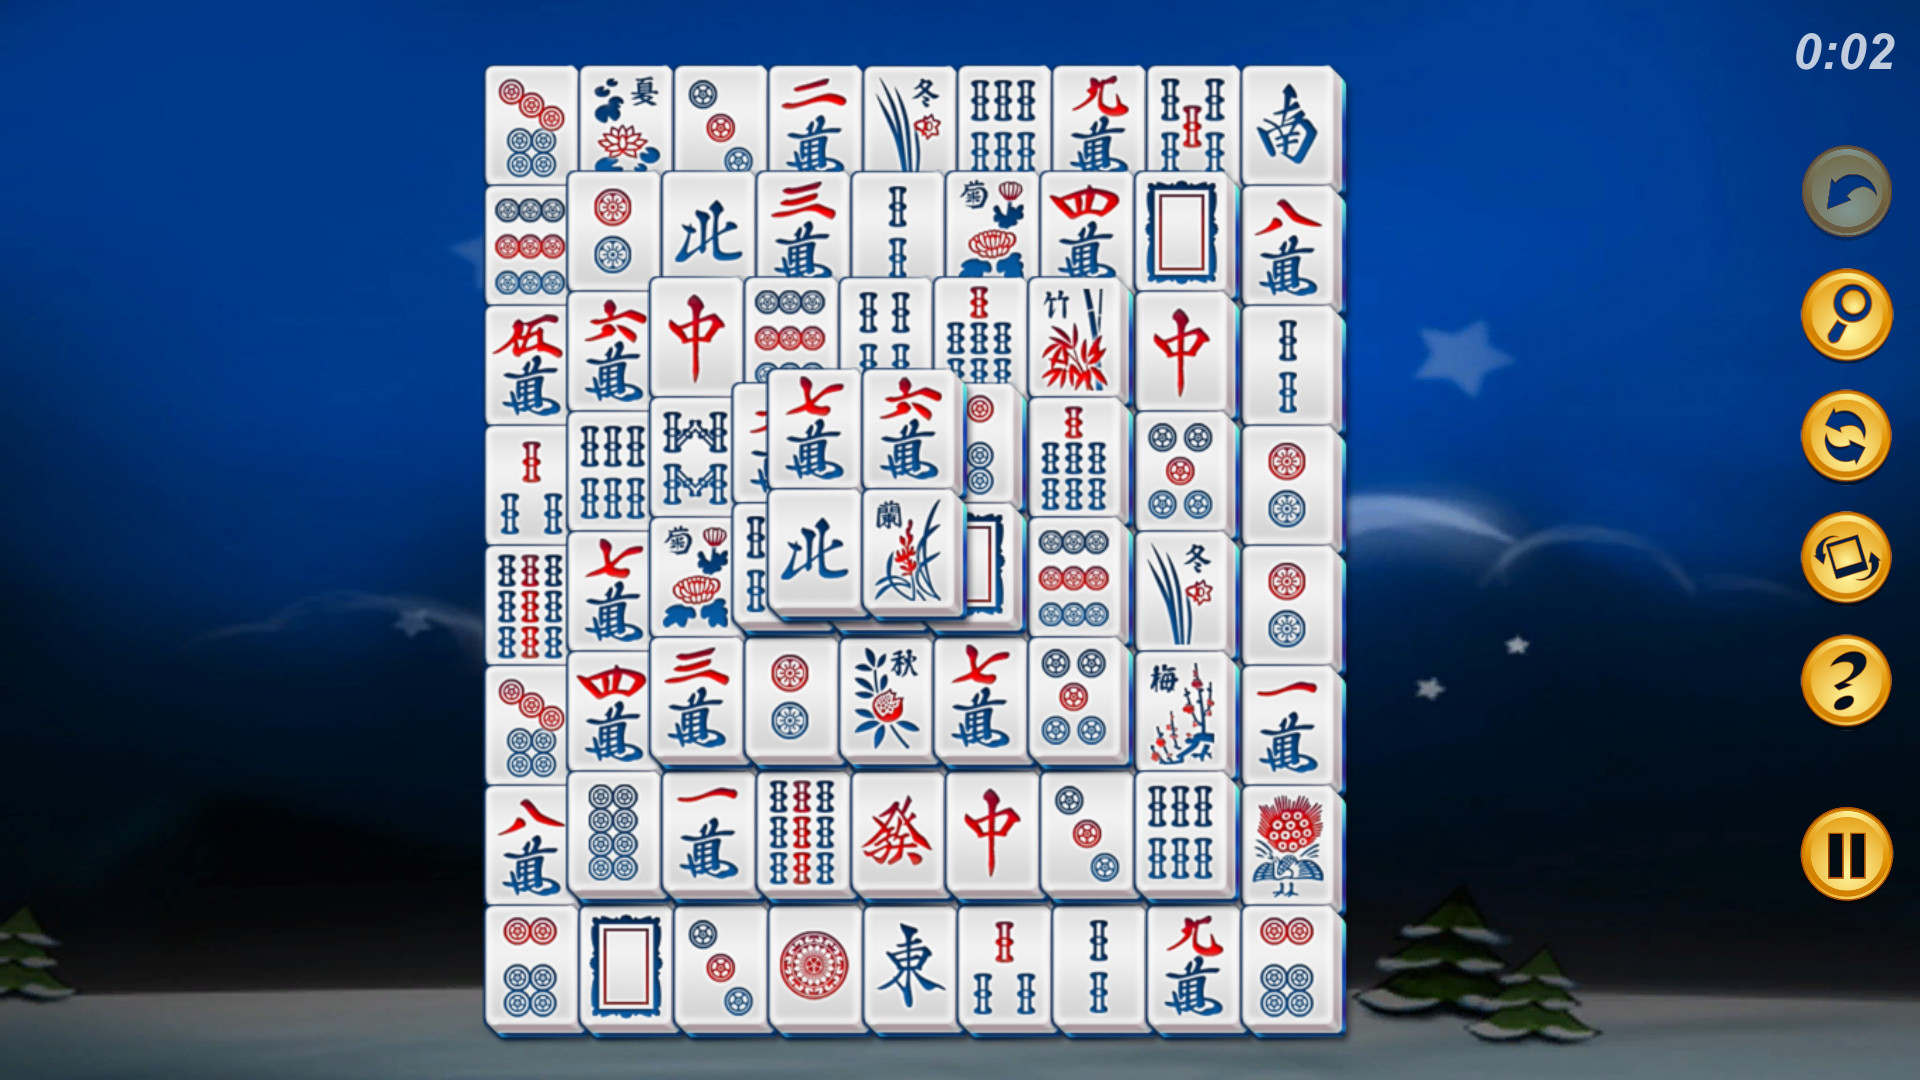 download the last version for windows Mahjong Deluxe Free